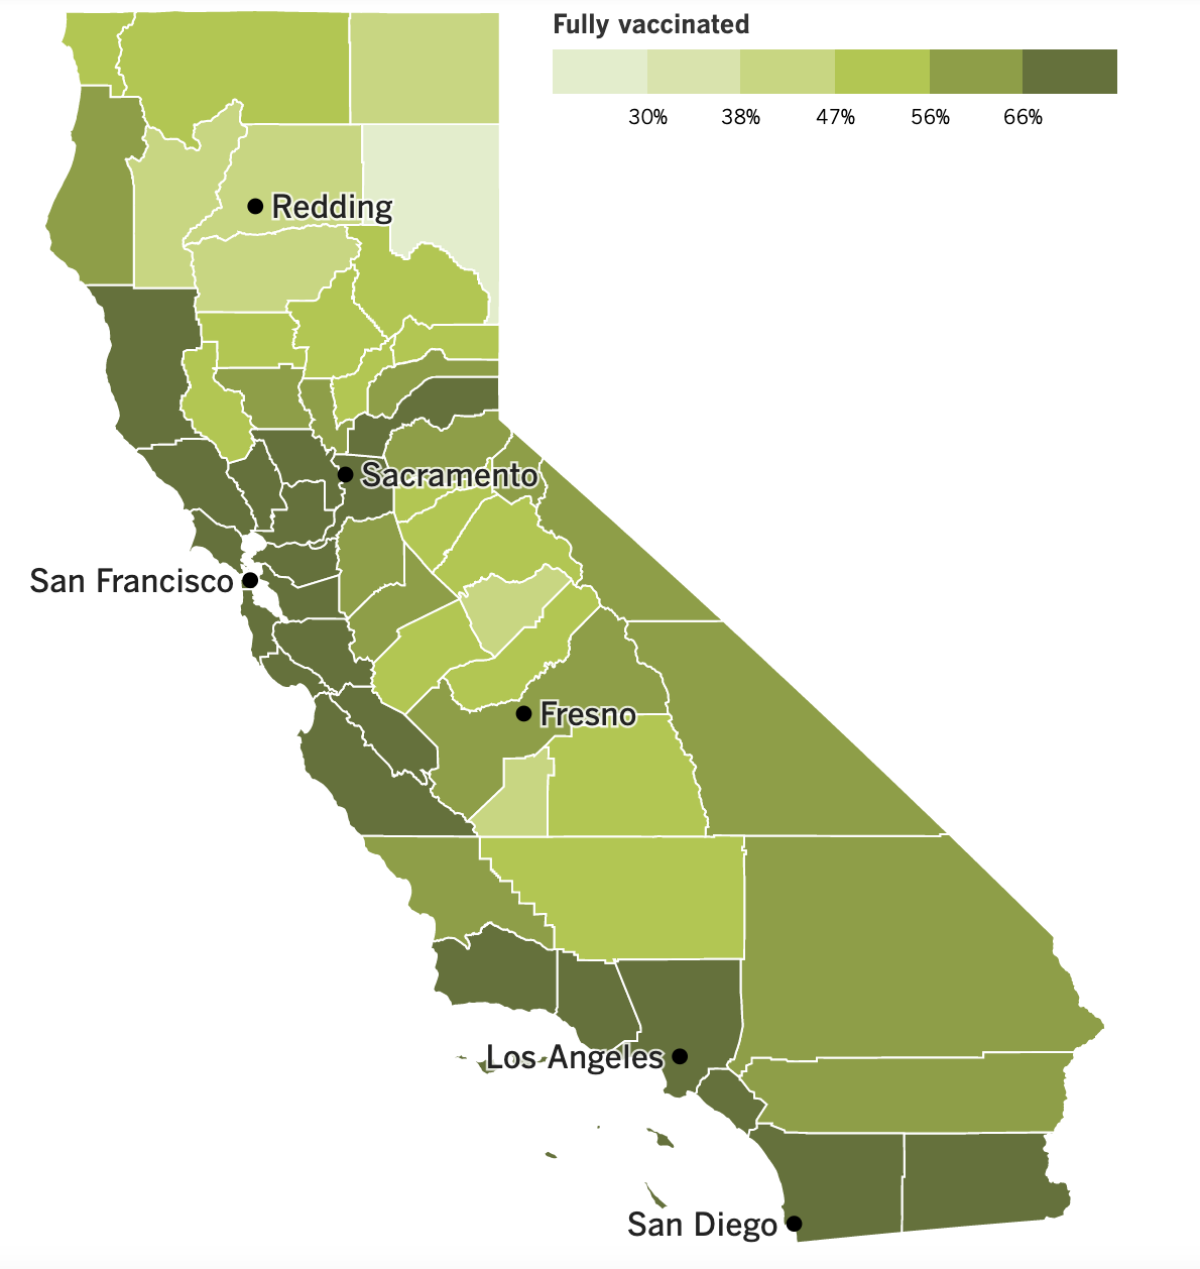 A map showing California's vaccination progress by county as of Feb. 22, 2022.